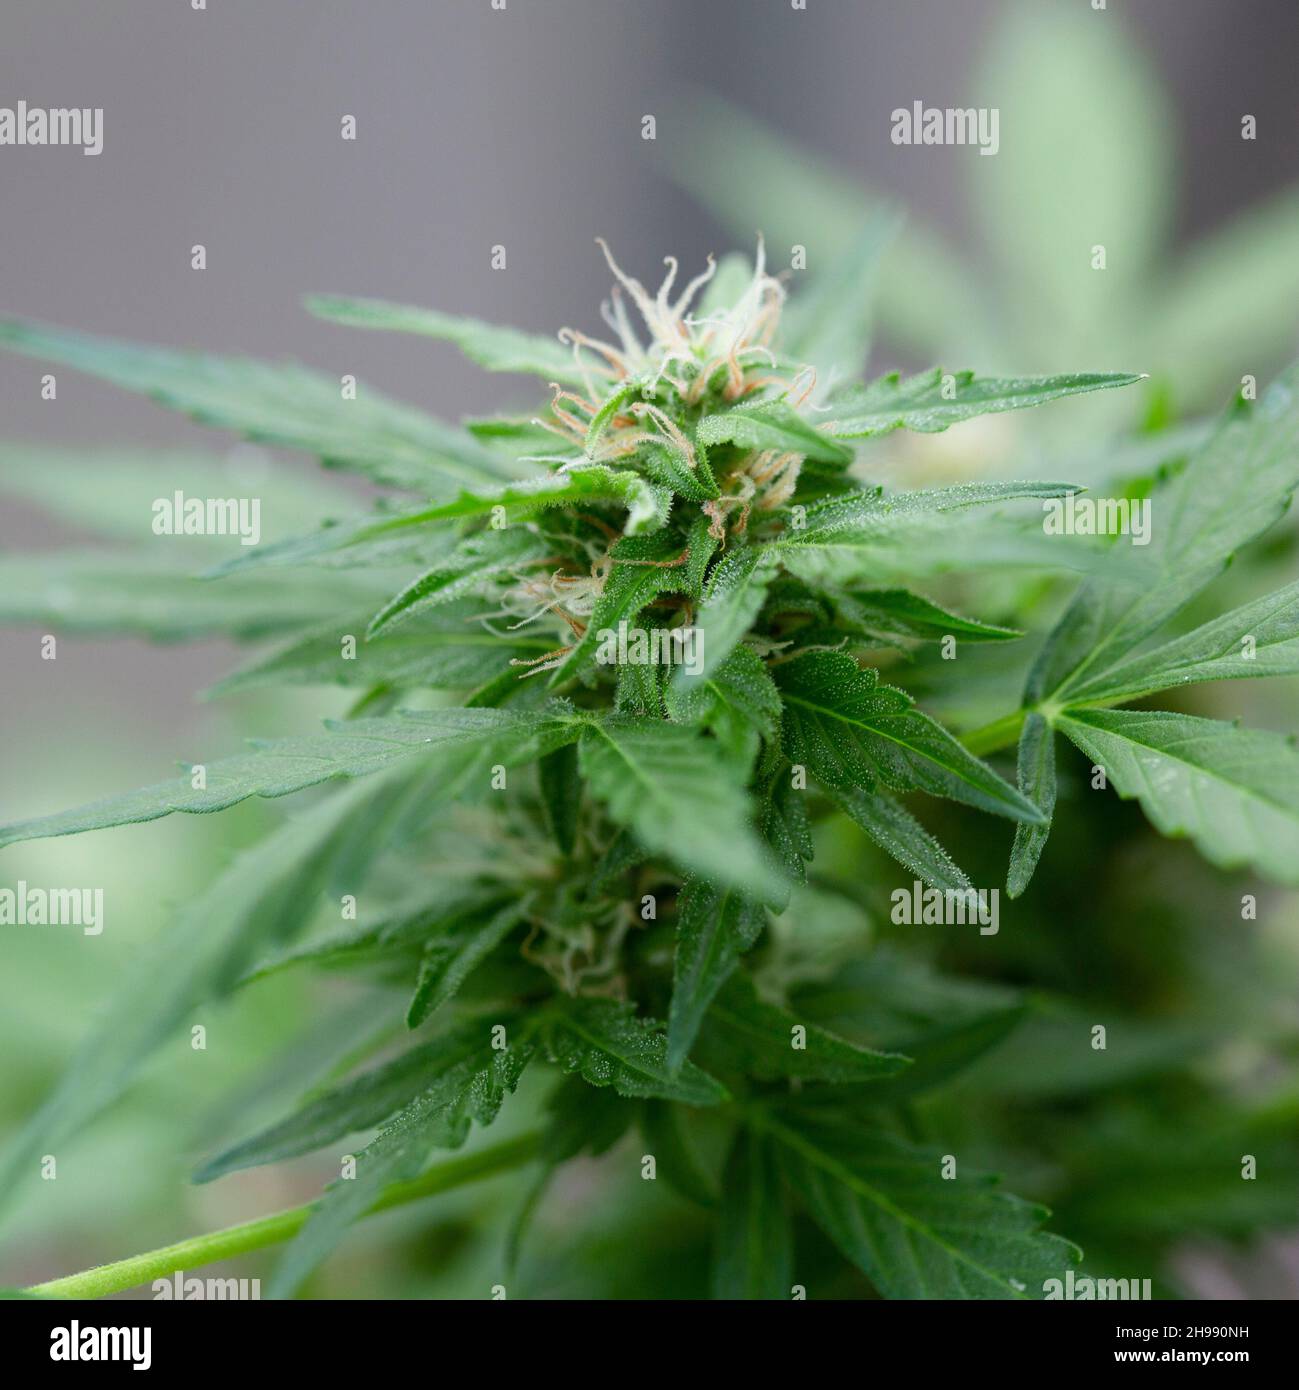 Homegrown cannabis sativa in late flower stage Stock Photo